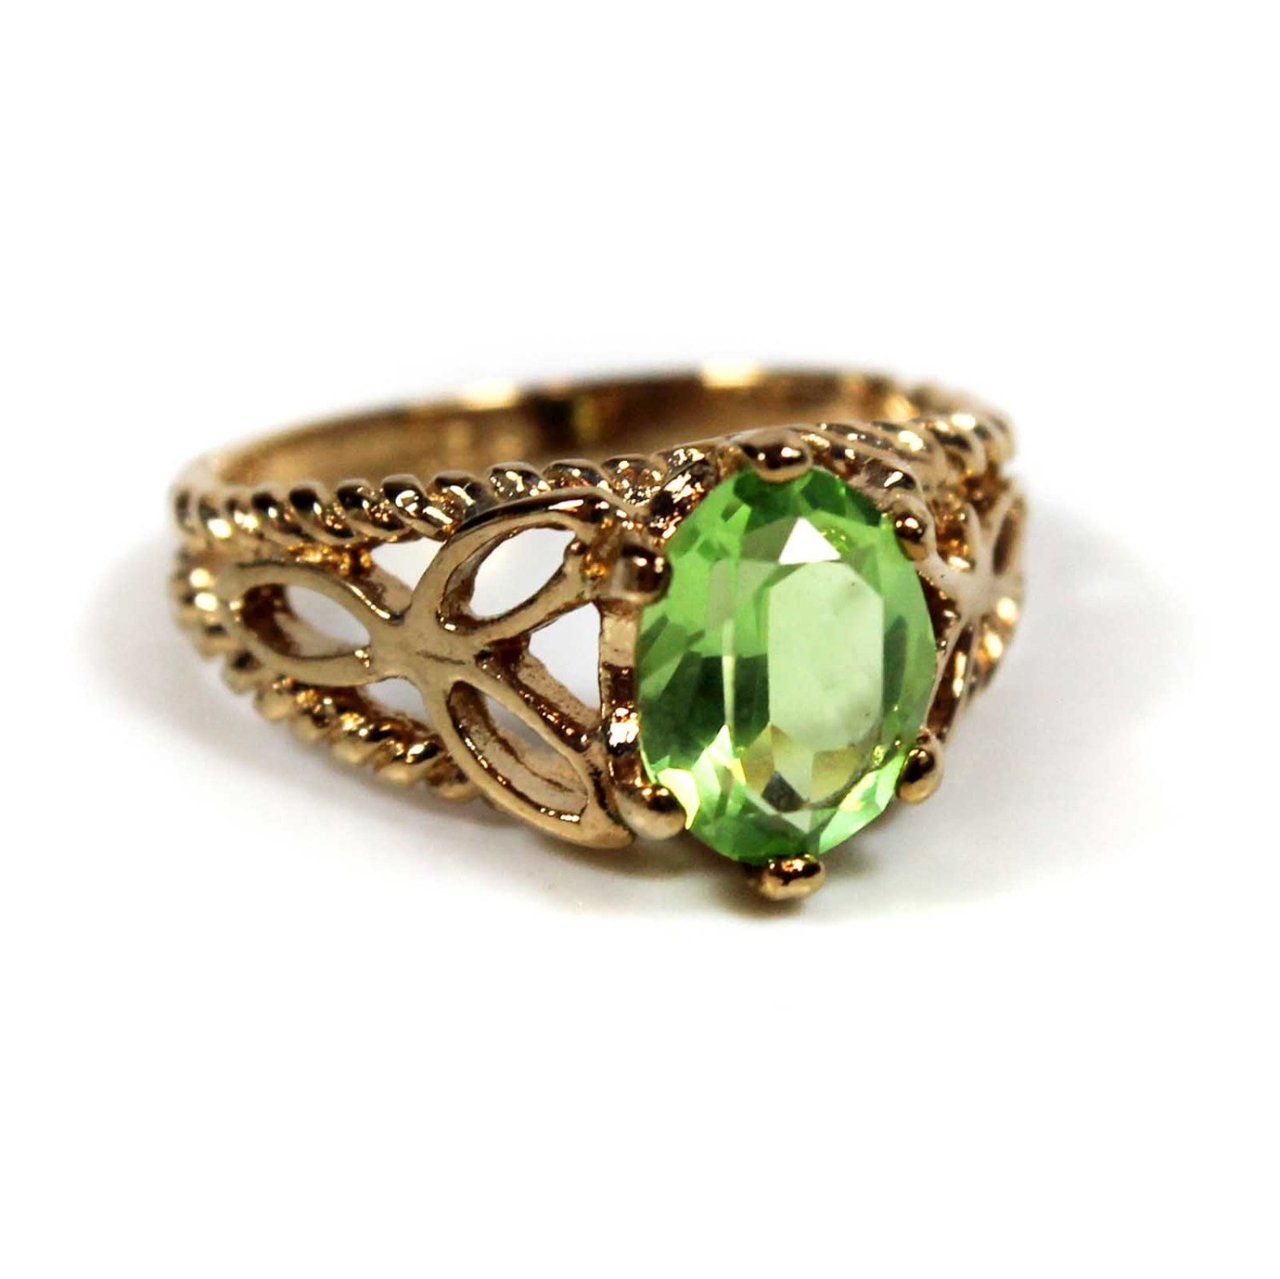 Vintage Peridot Austrian Crystal 18k Gold Electroplated Filigree Cocktail Ring Made in USA